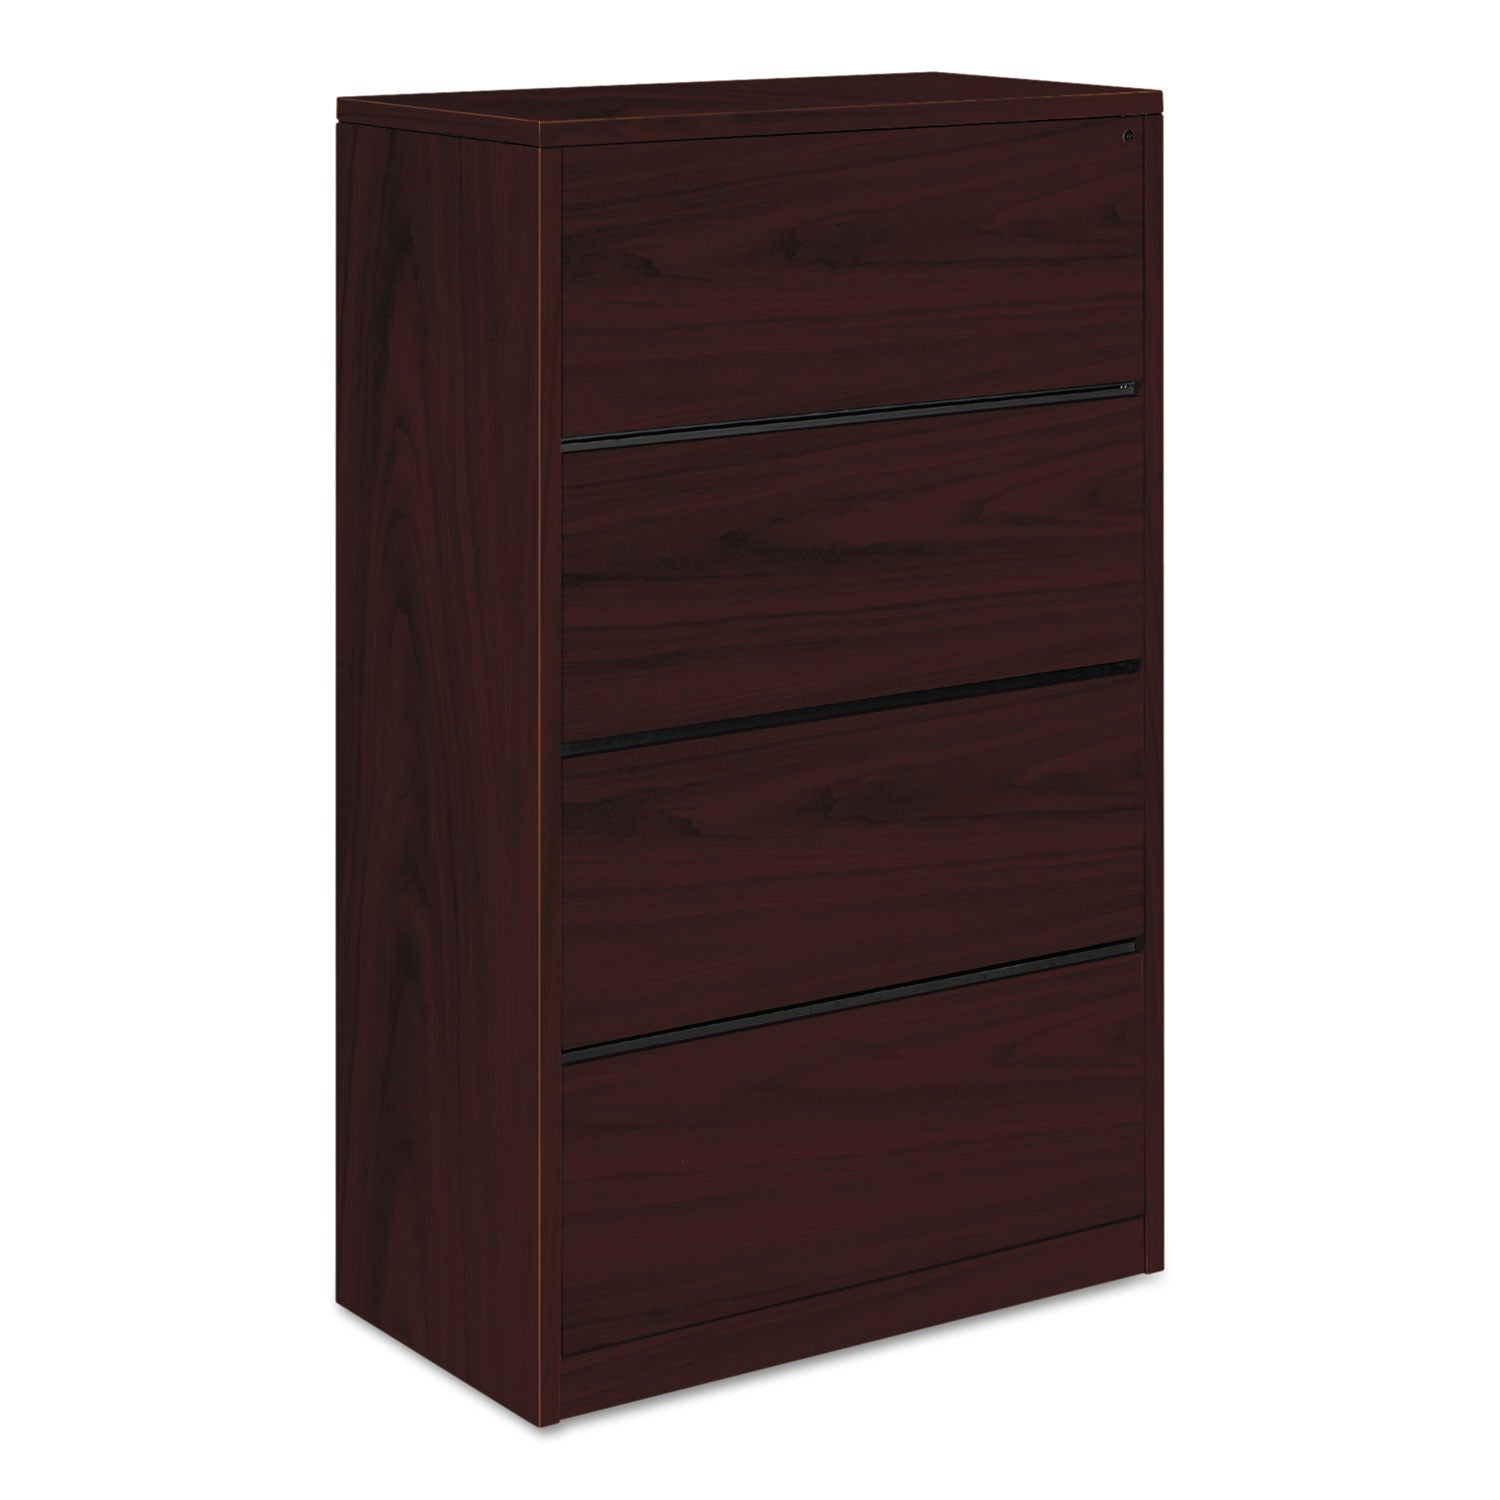 10500 Series Lateral File, 4 Legal/Letter-Size File Drawers, Mahogany, 36" x 20" x 59.13 - 